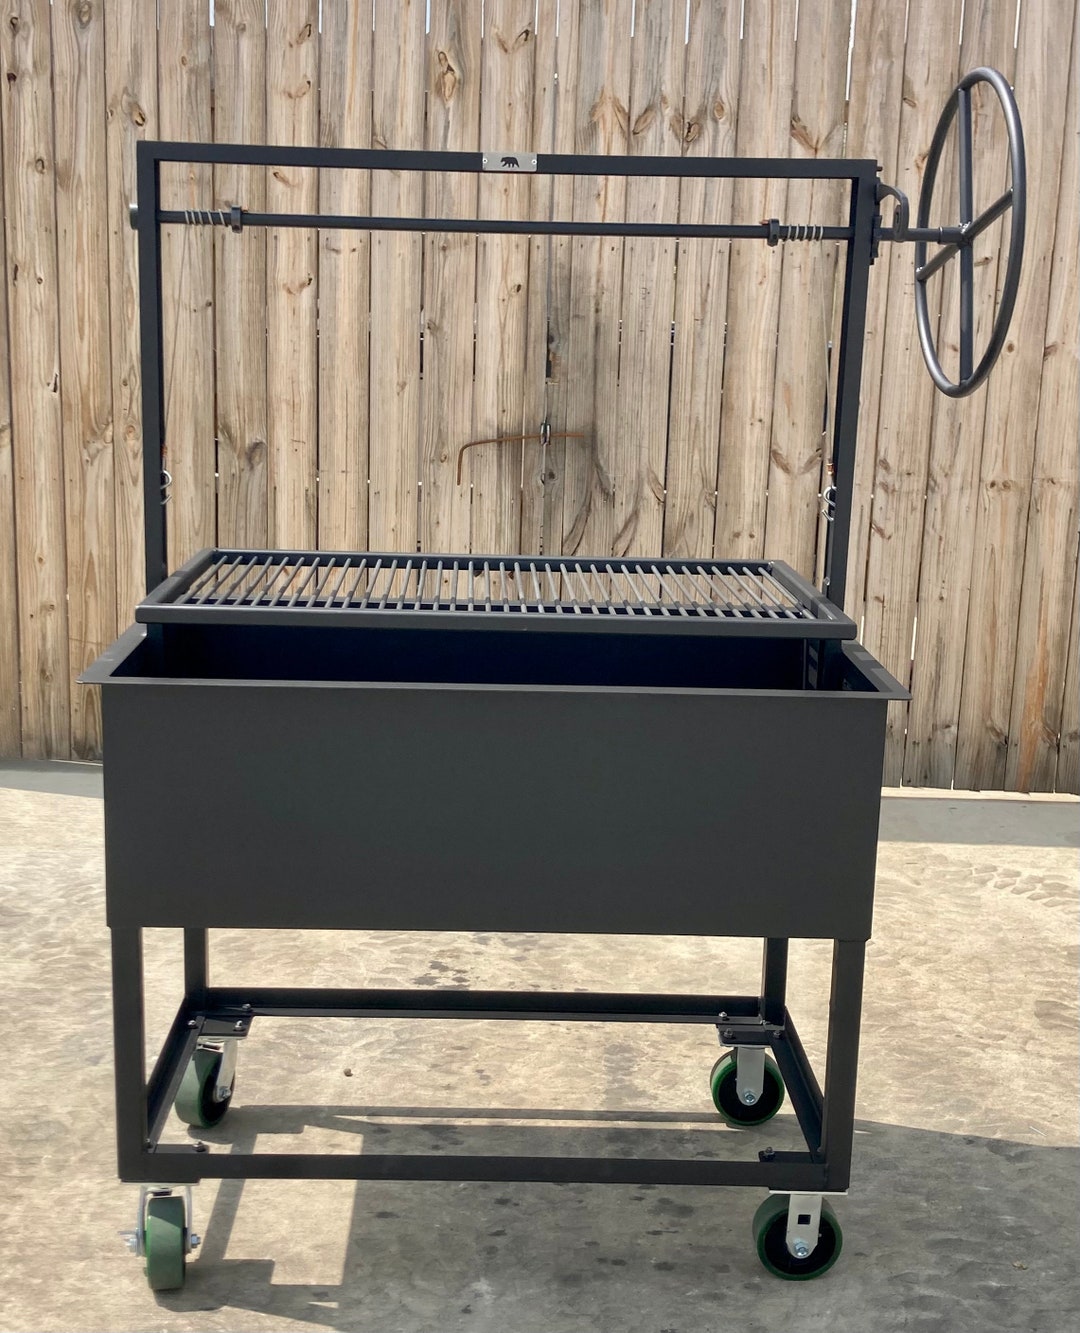 Santa Maria BBQ Pit Includes a With Casters - Etsy